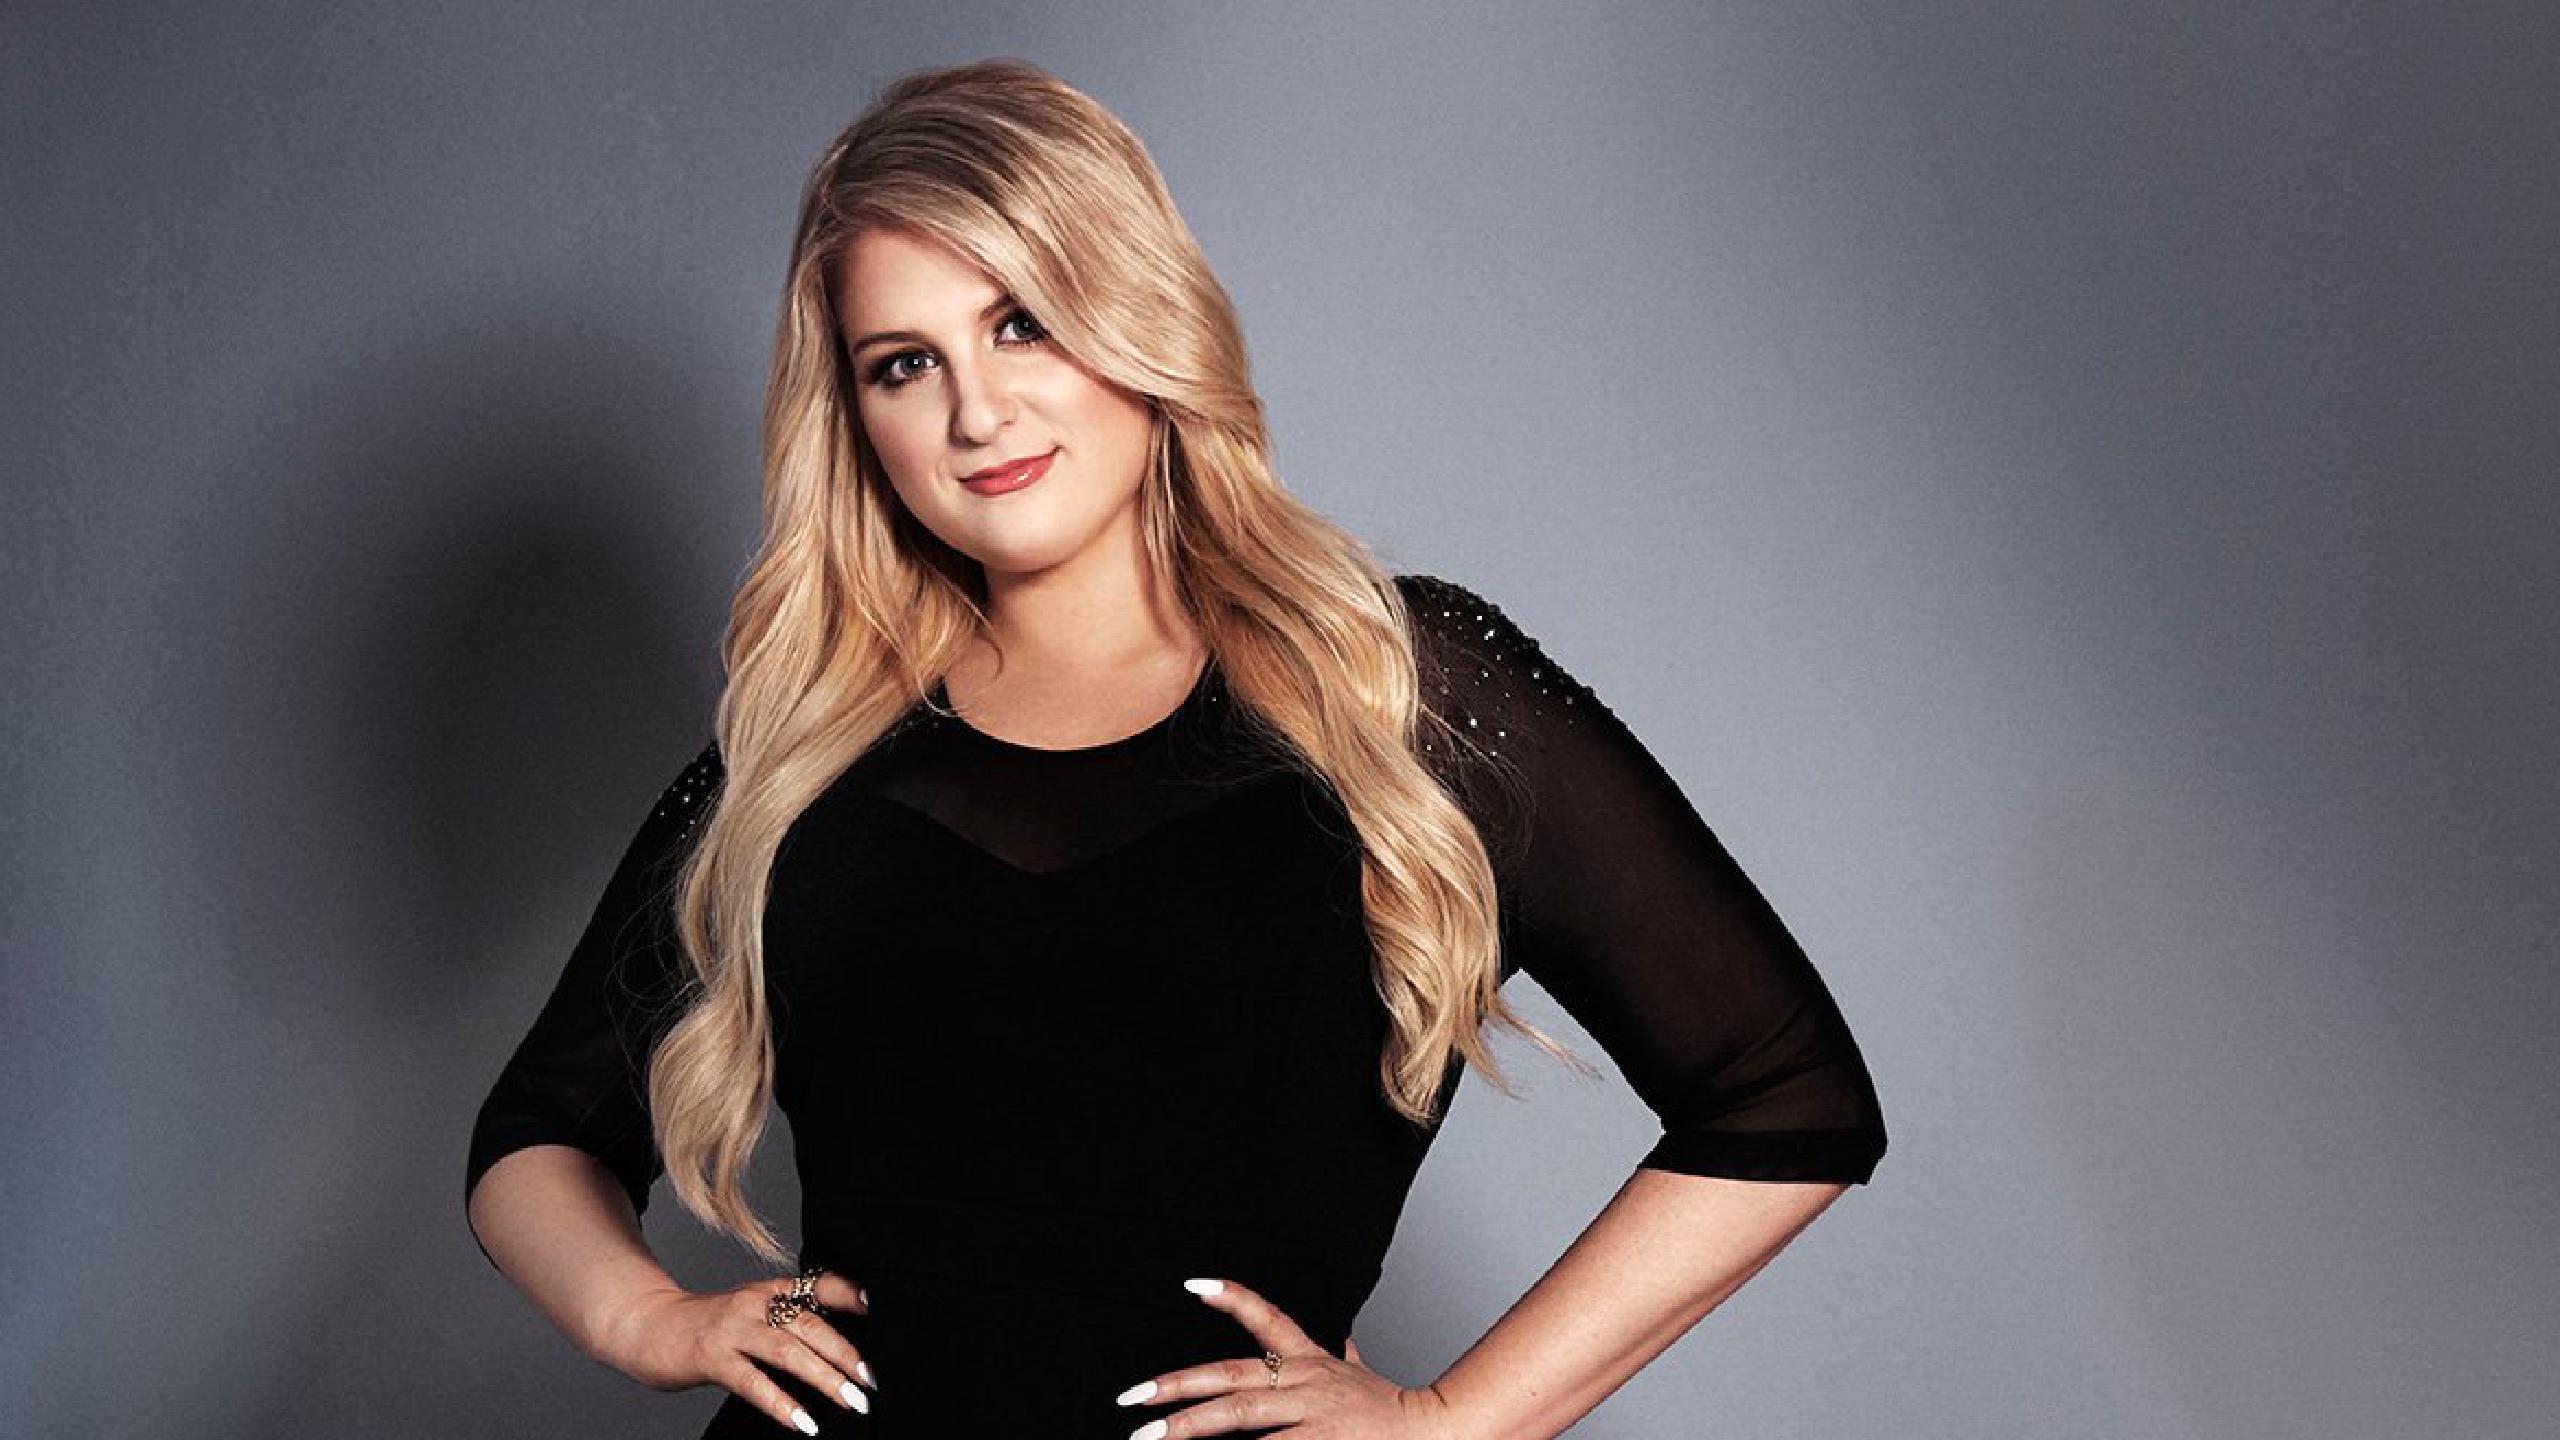 Meghan Trainor tour dates 2019 2020. Meghan Trainor tickets and concerts | Wegow2560 x 1440